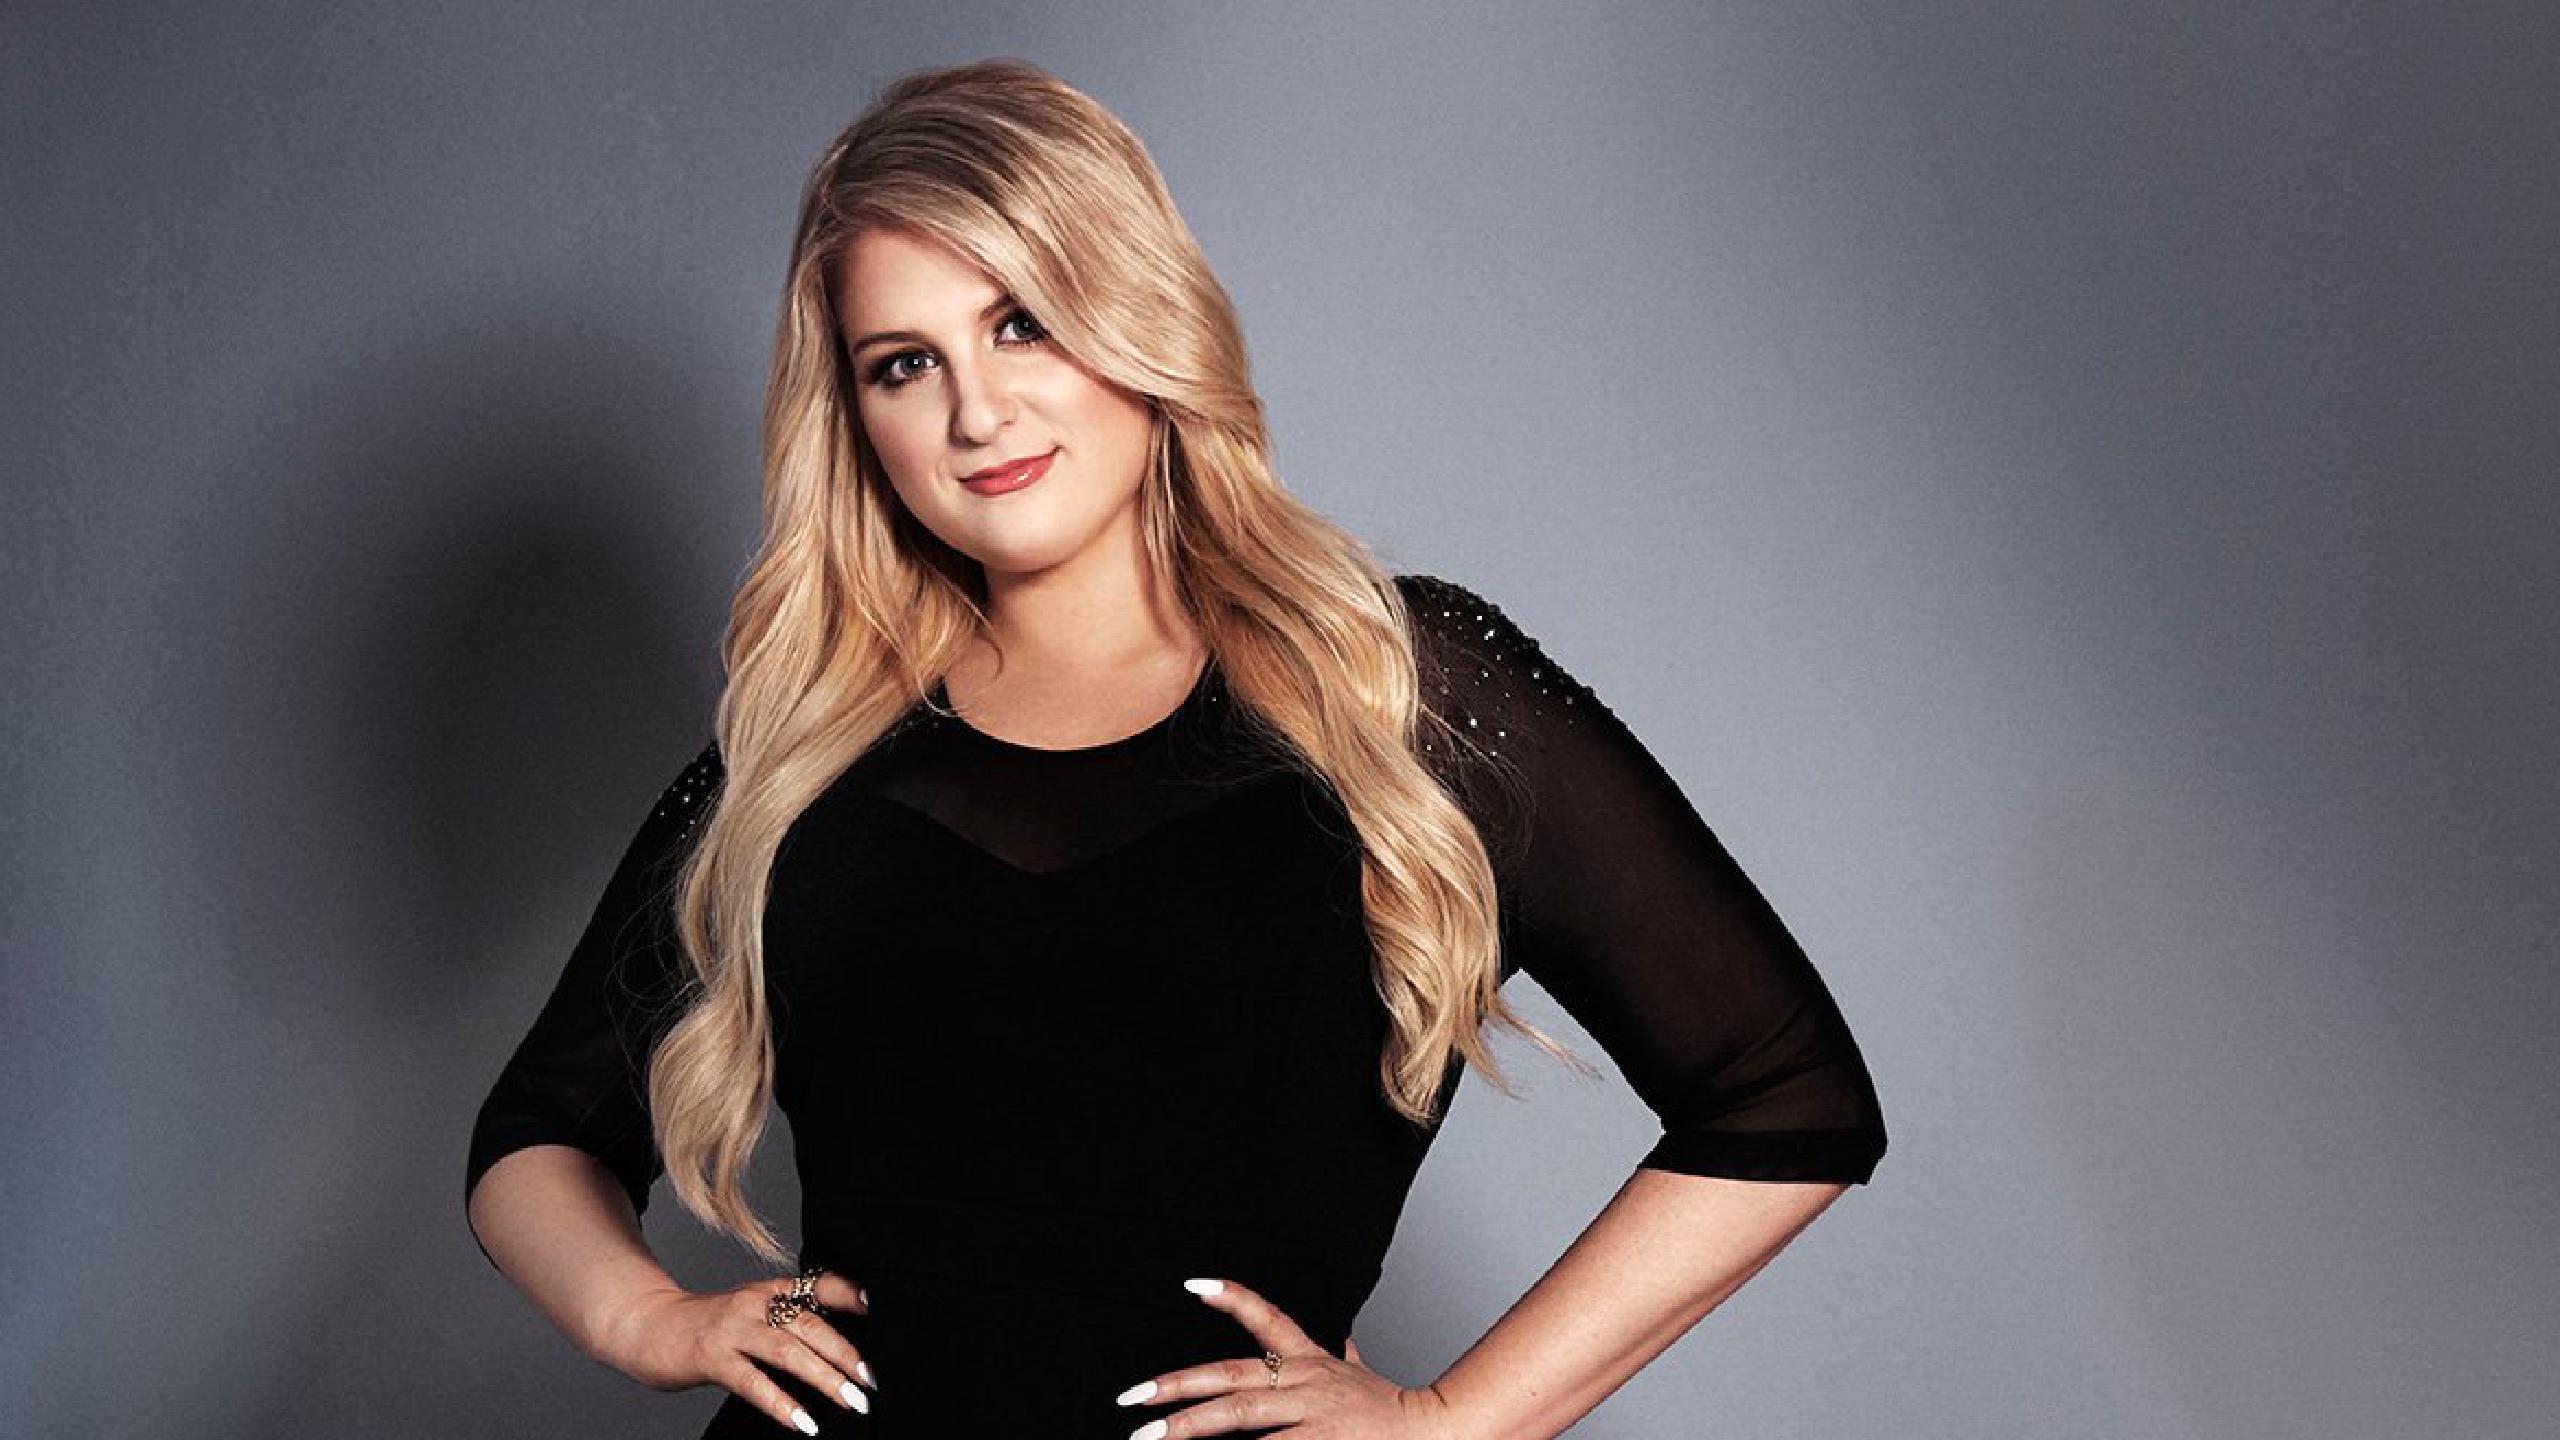 Meghan Trainor tour dates 2019 2020. Meghan Trainor tickets and concerts | Wegow2560 x 1440